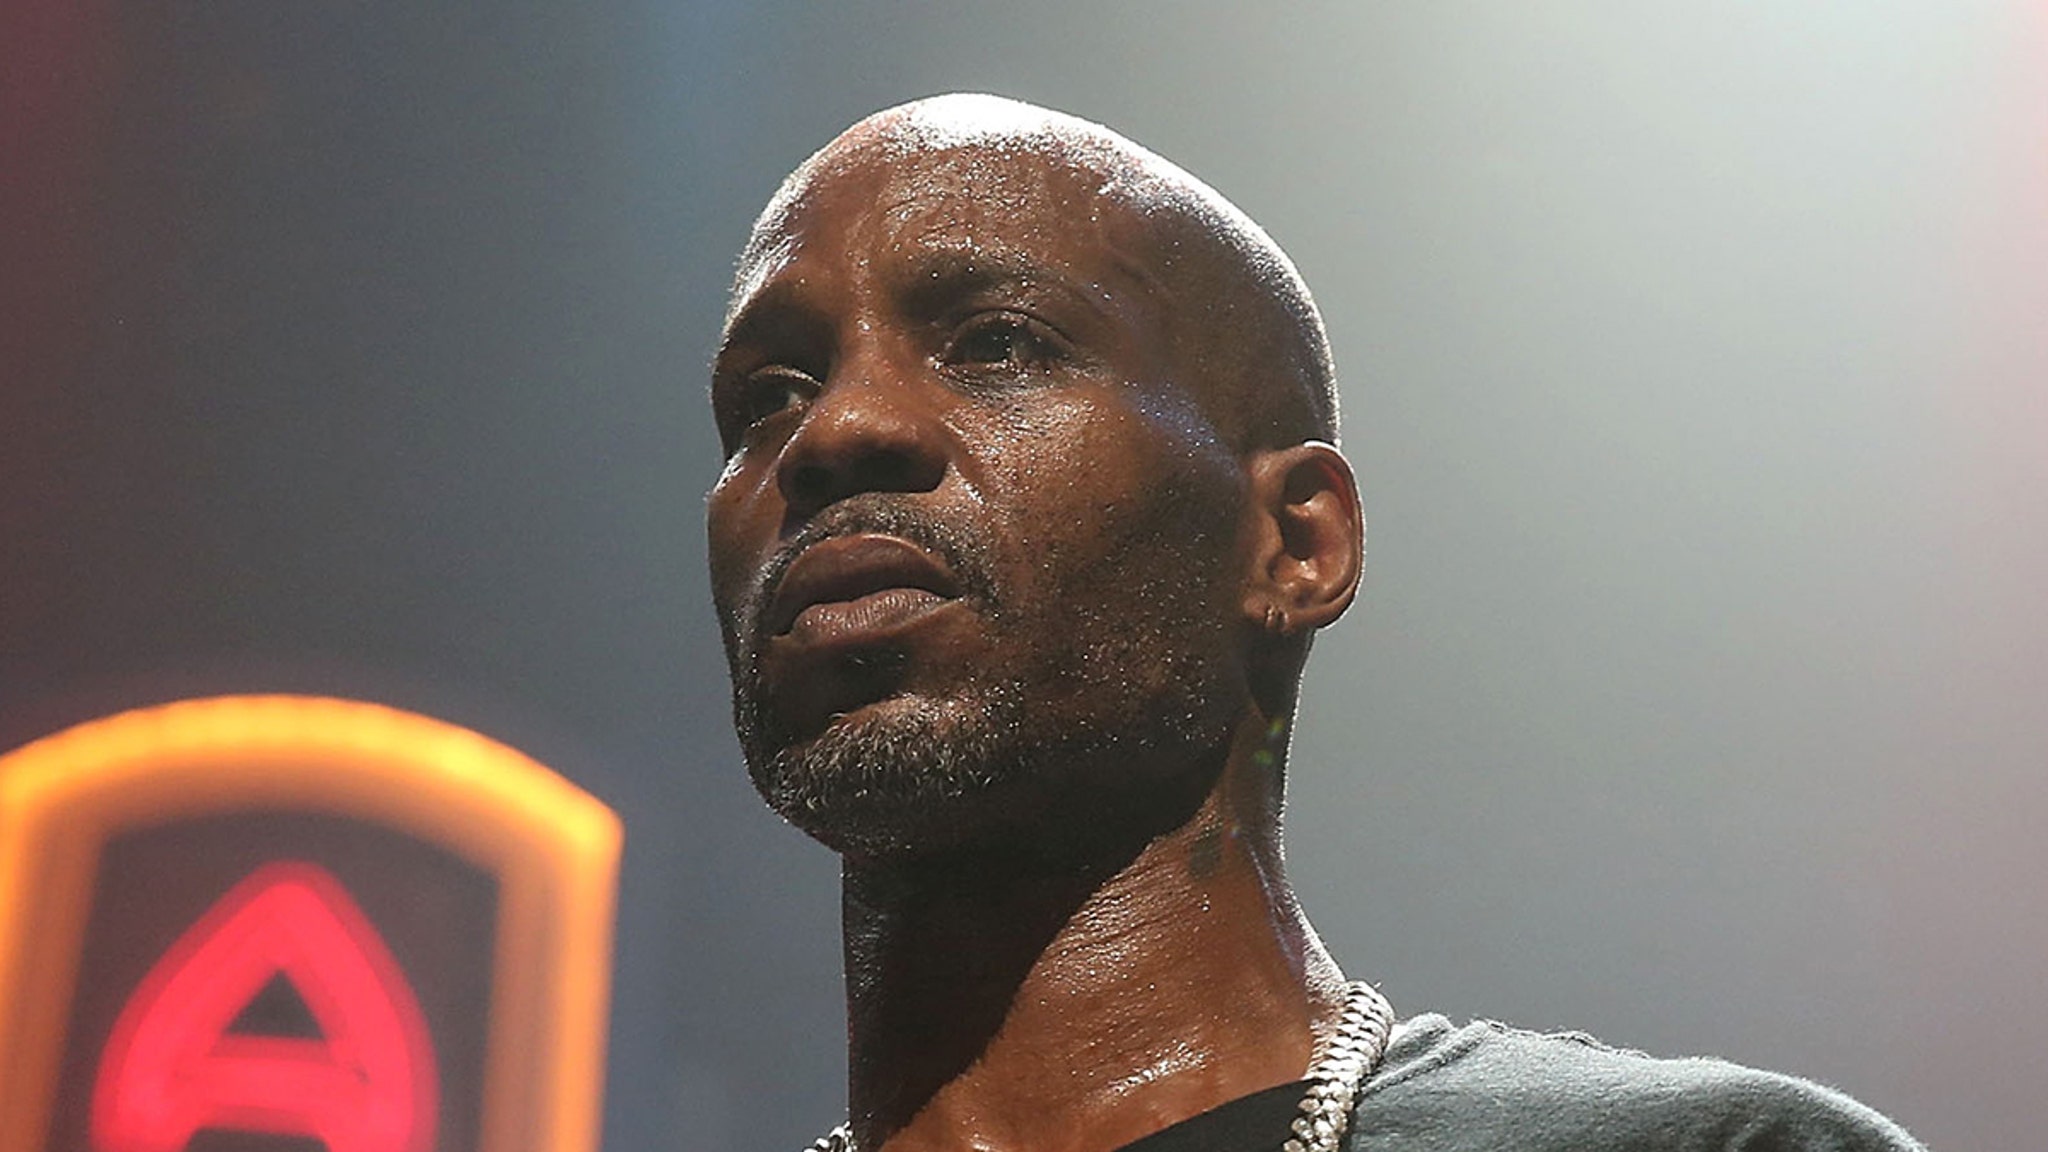 DMX has died aged 50 - News - Mixmag